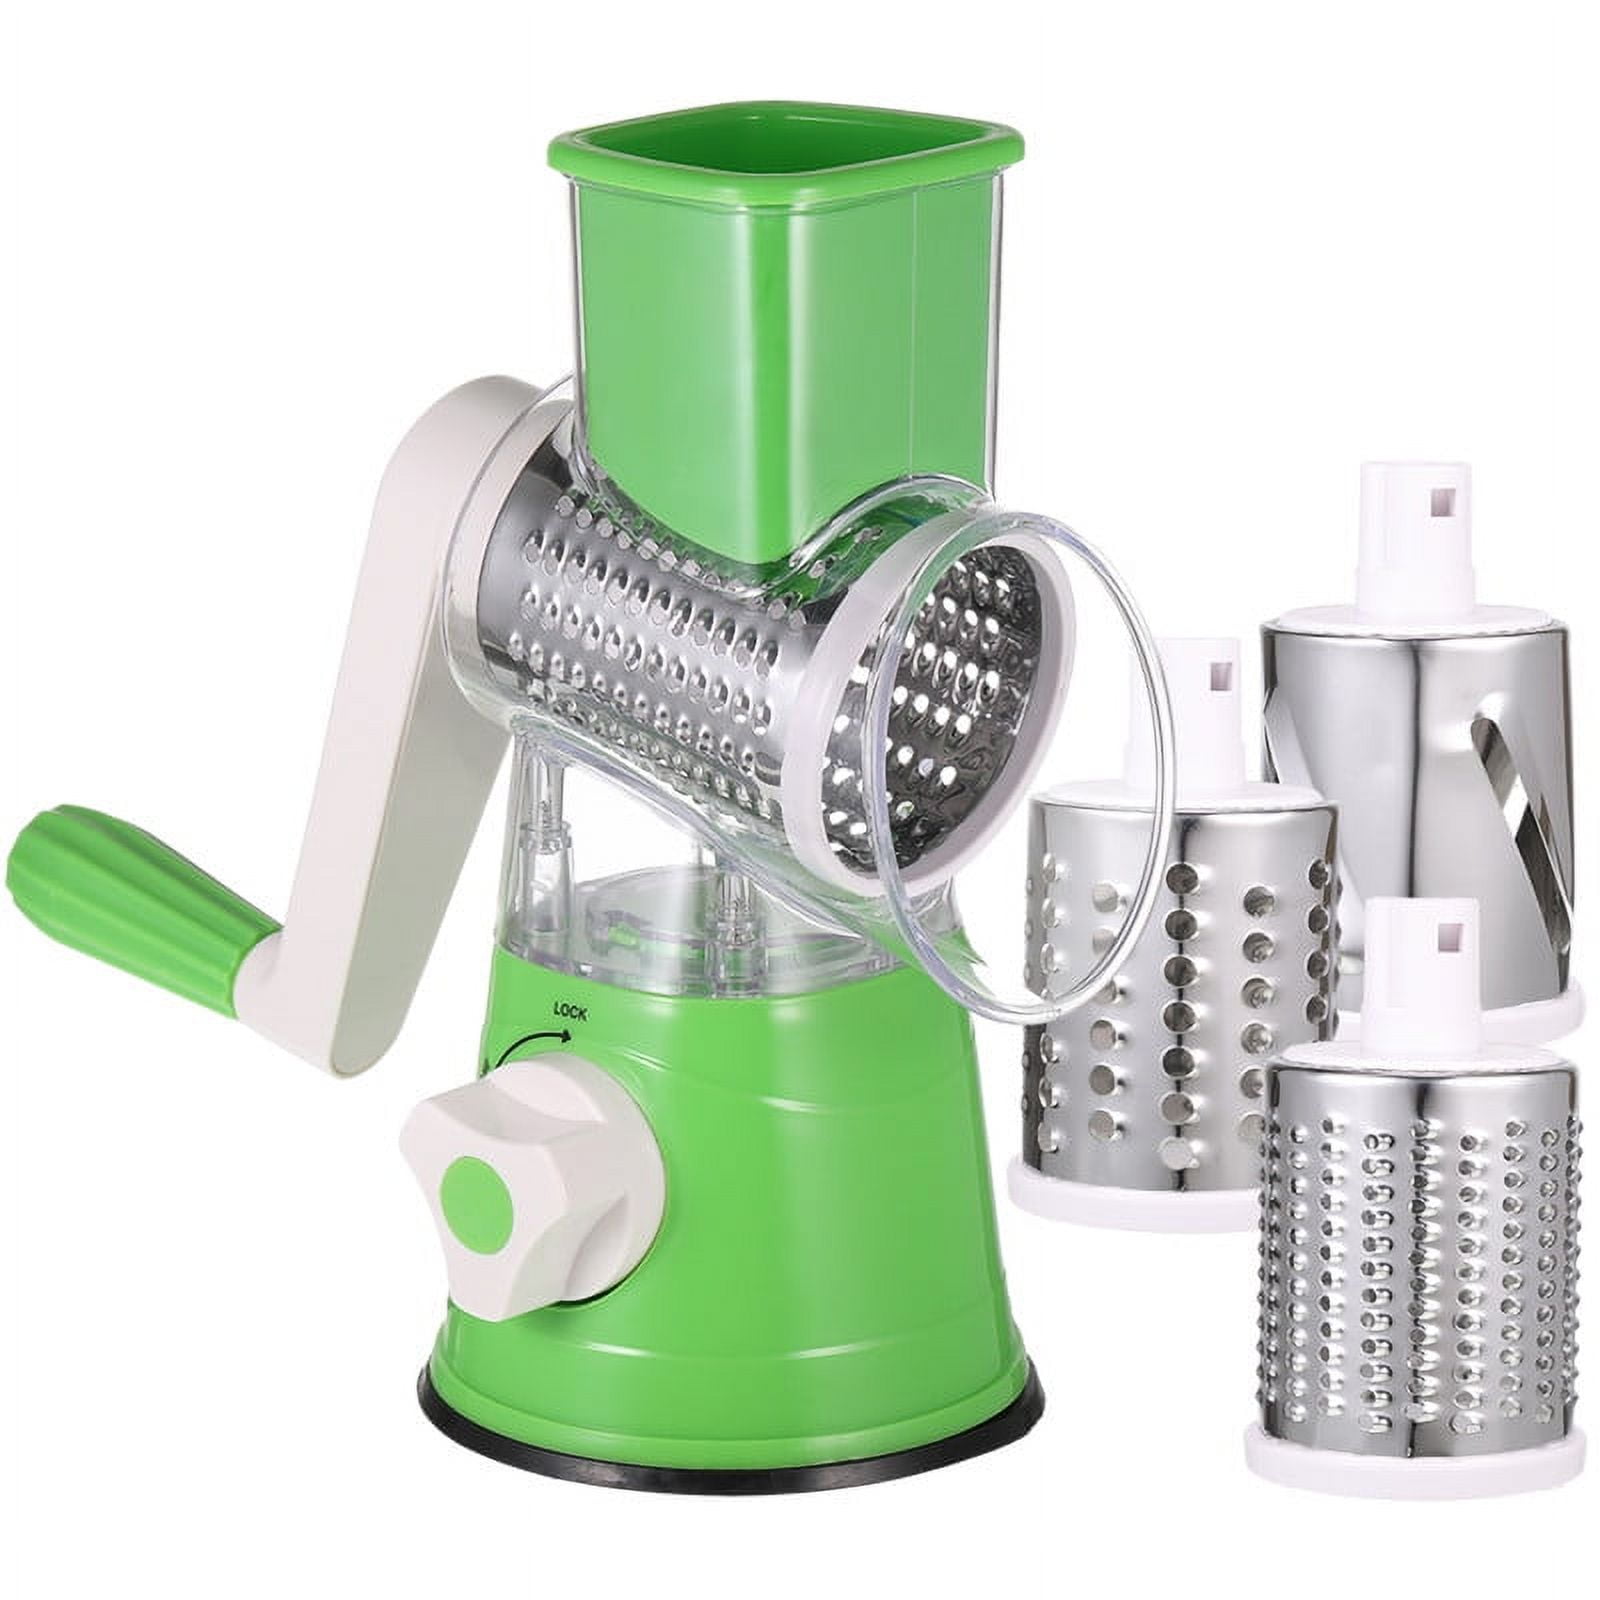 Product Name: *2 In 1 Dry Fruit Slicer With Cheese Grater